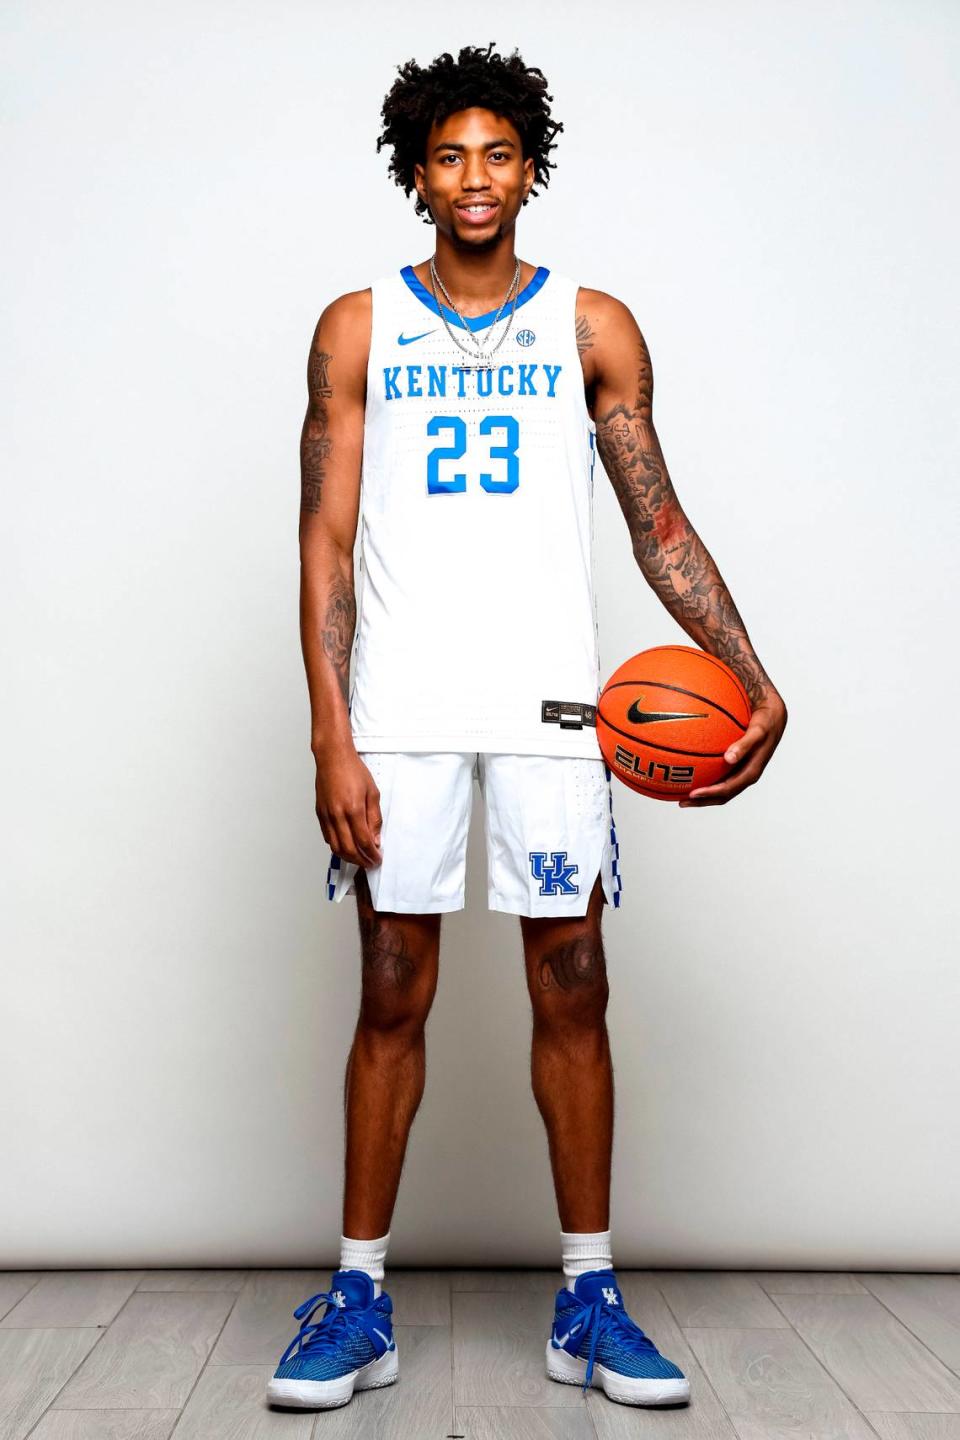 Class of 2023 small forward Jordan Burks poses in a Kentucky men’s basketball uniform during a recruiting visit. Burks committed to Kentucky on Monday morning.